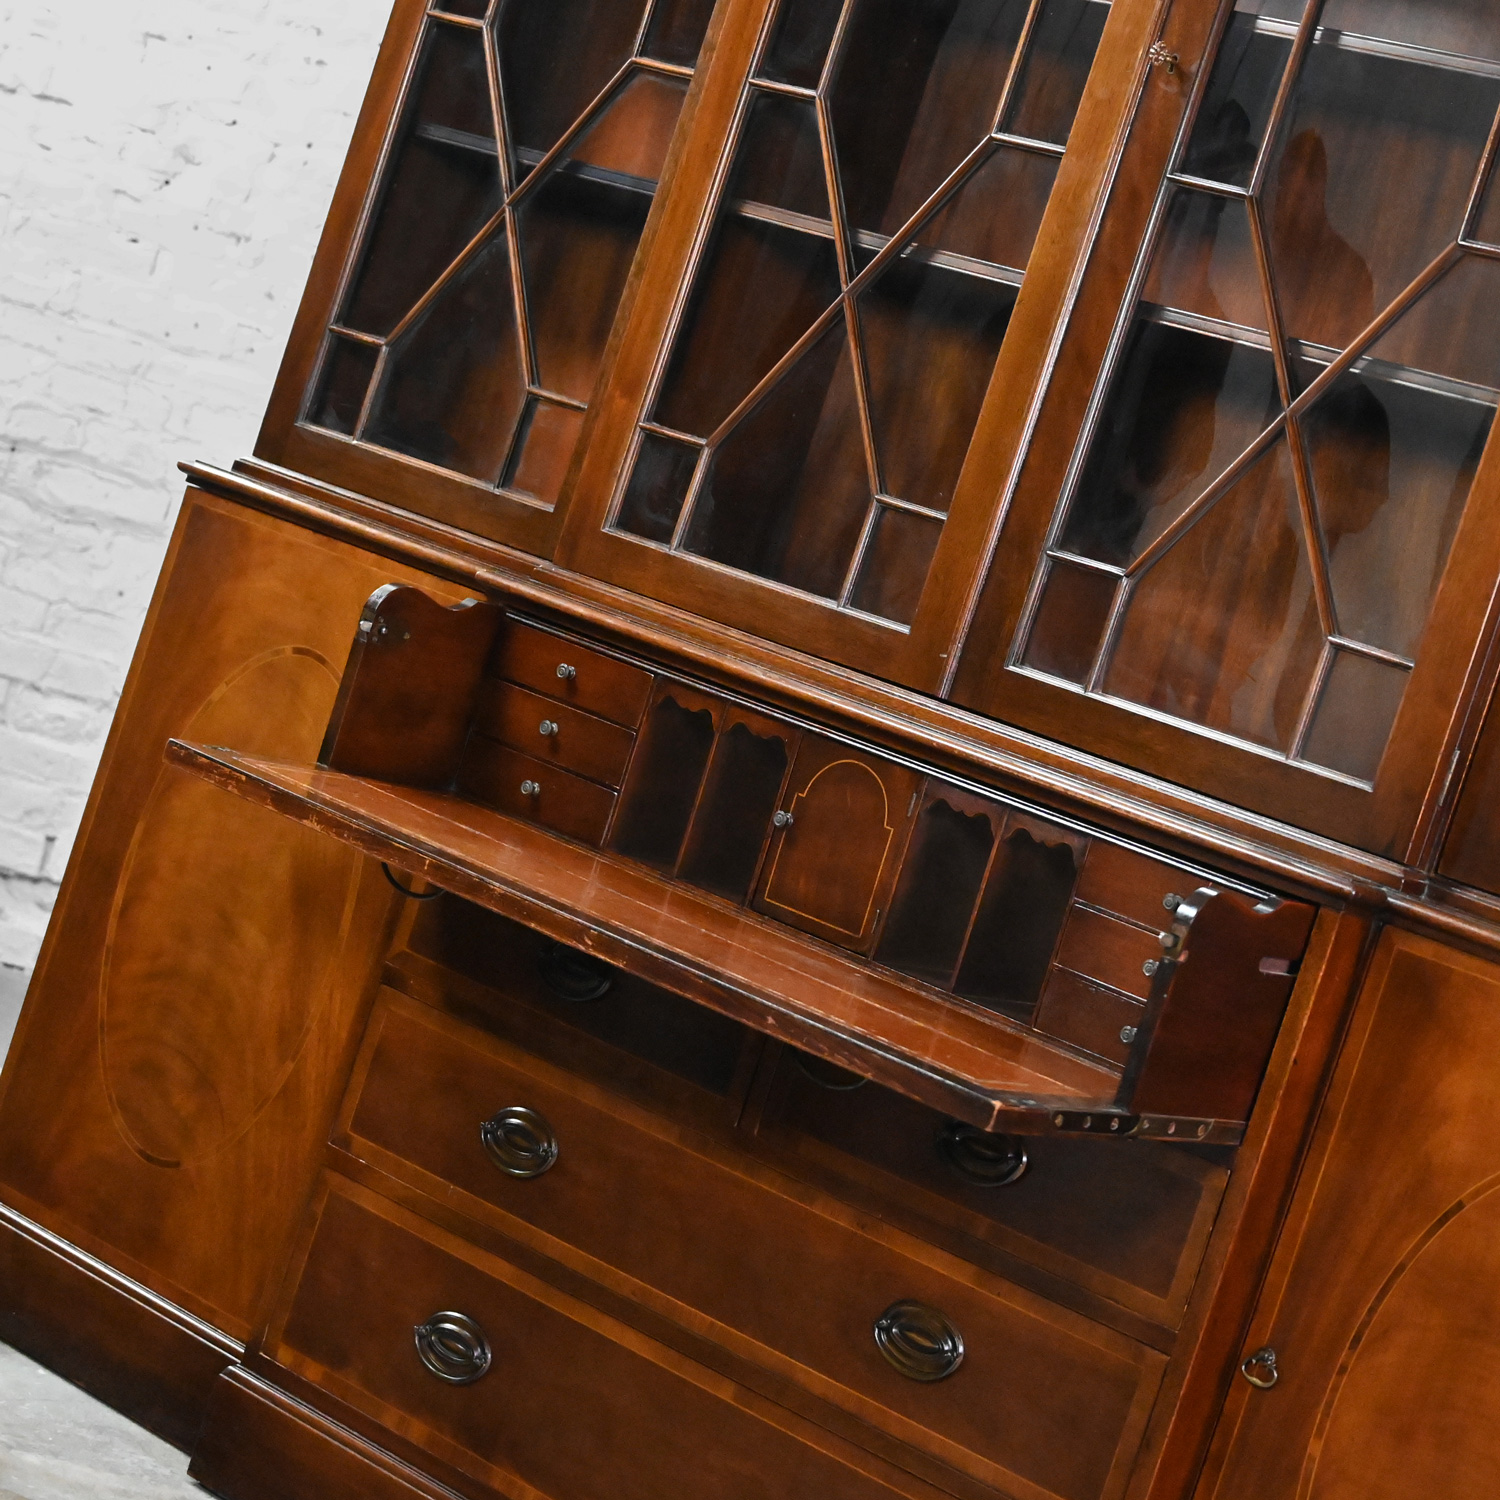 Mid-20th Century Chinese Chippendale Baker Furniture Mahogany & Walnut Breakfront Secretary China Cabinet Bookcase Pierced Pediment Top